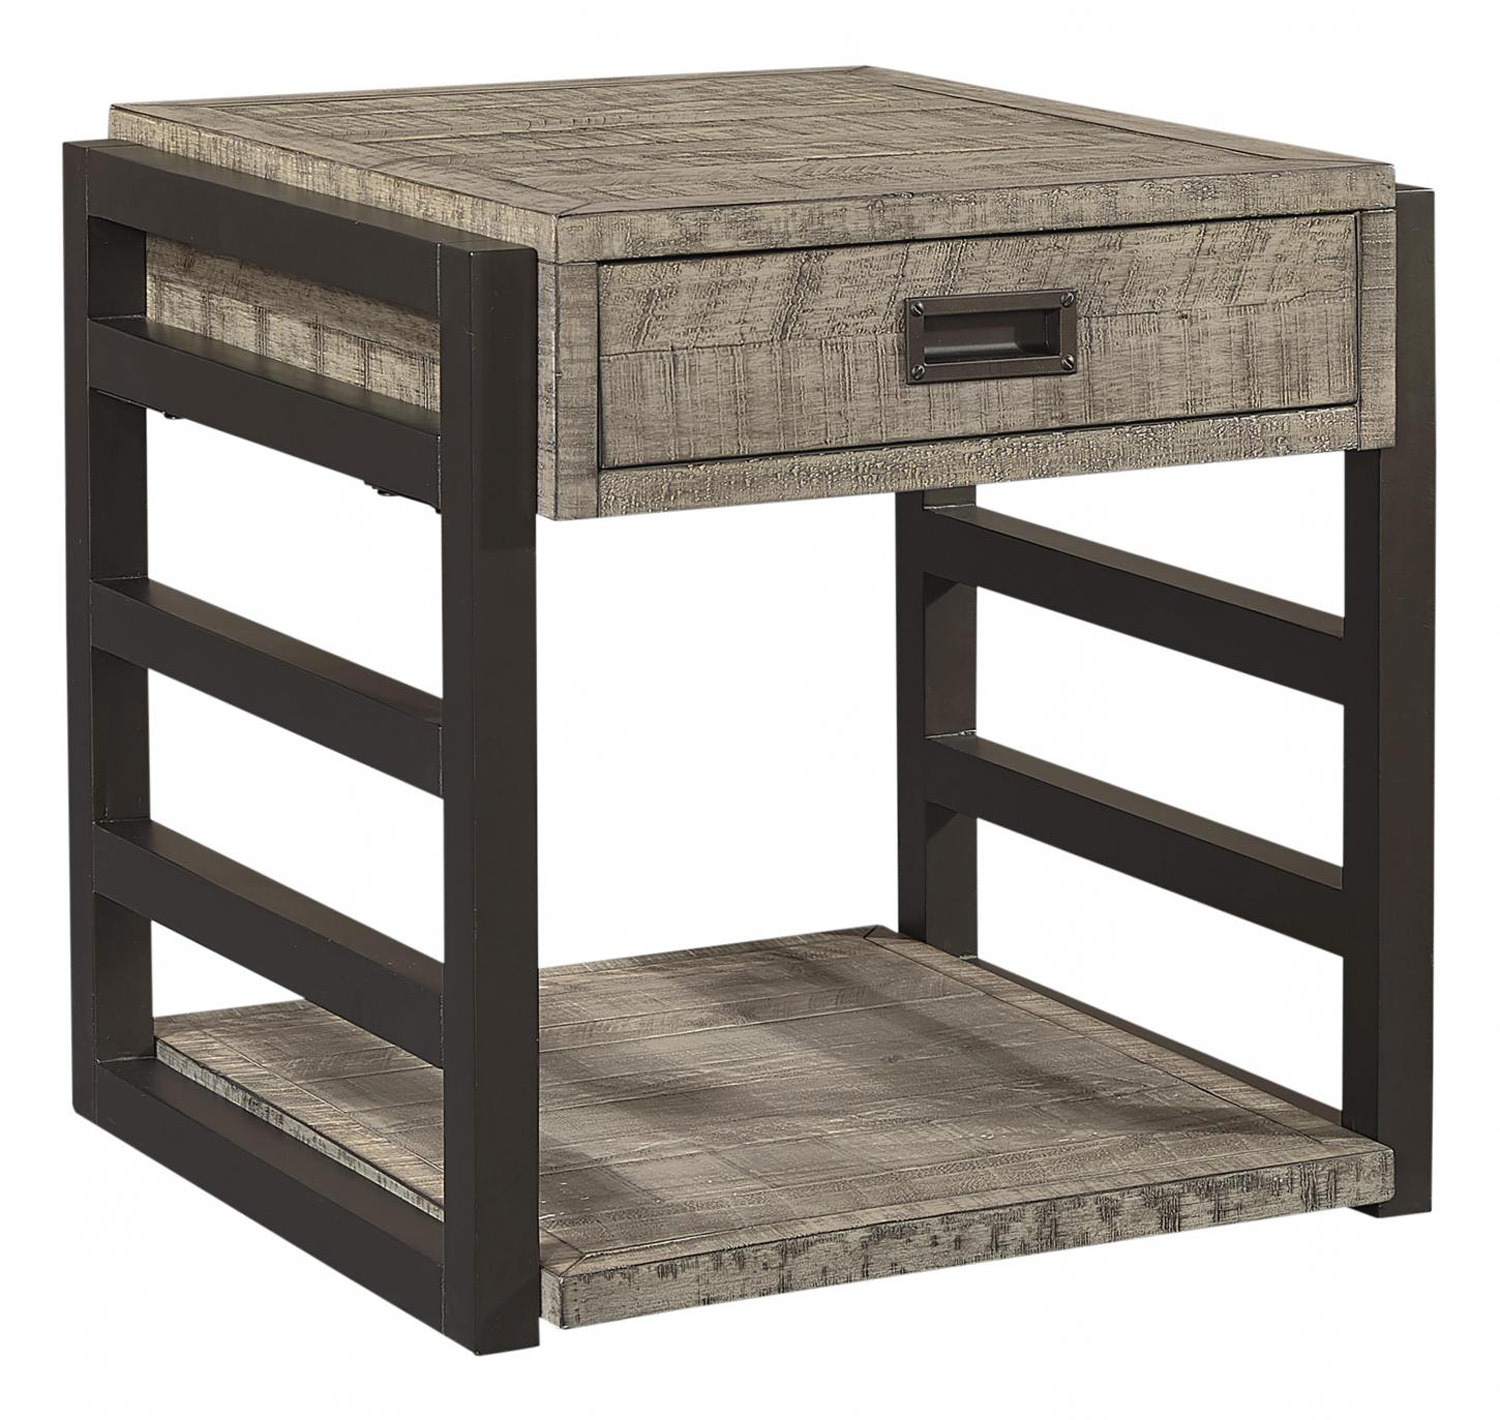 Grayson End Table in the Cinder Grey finish